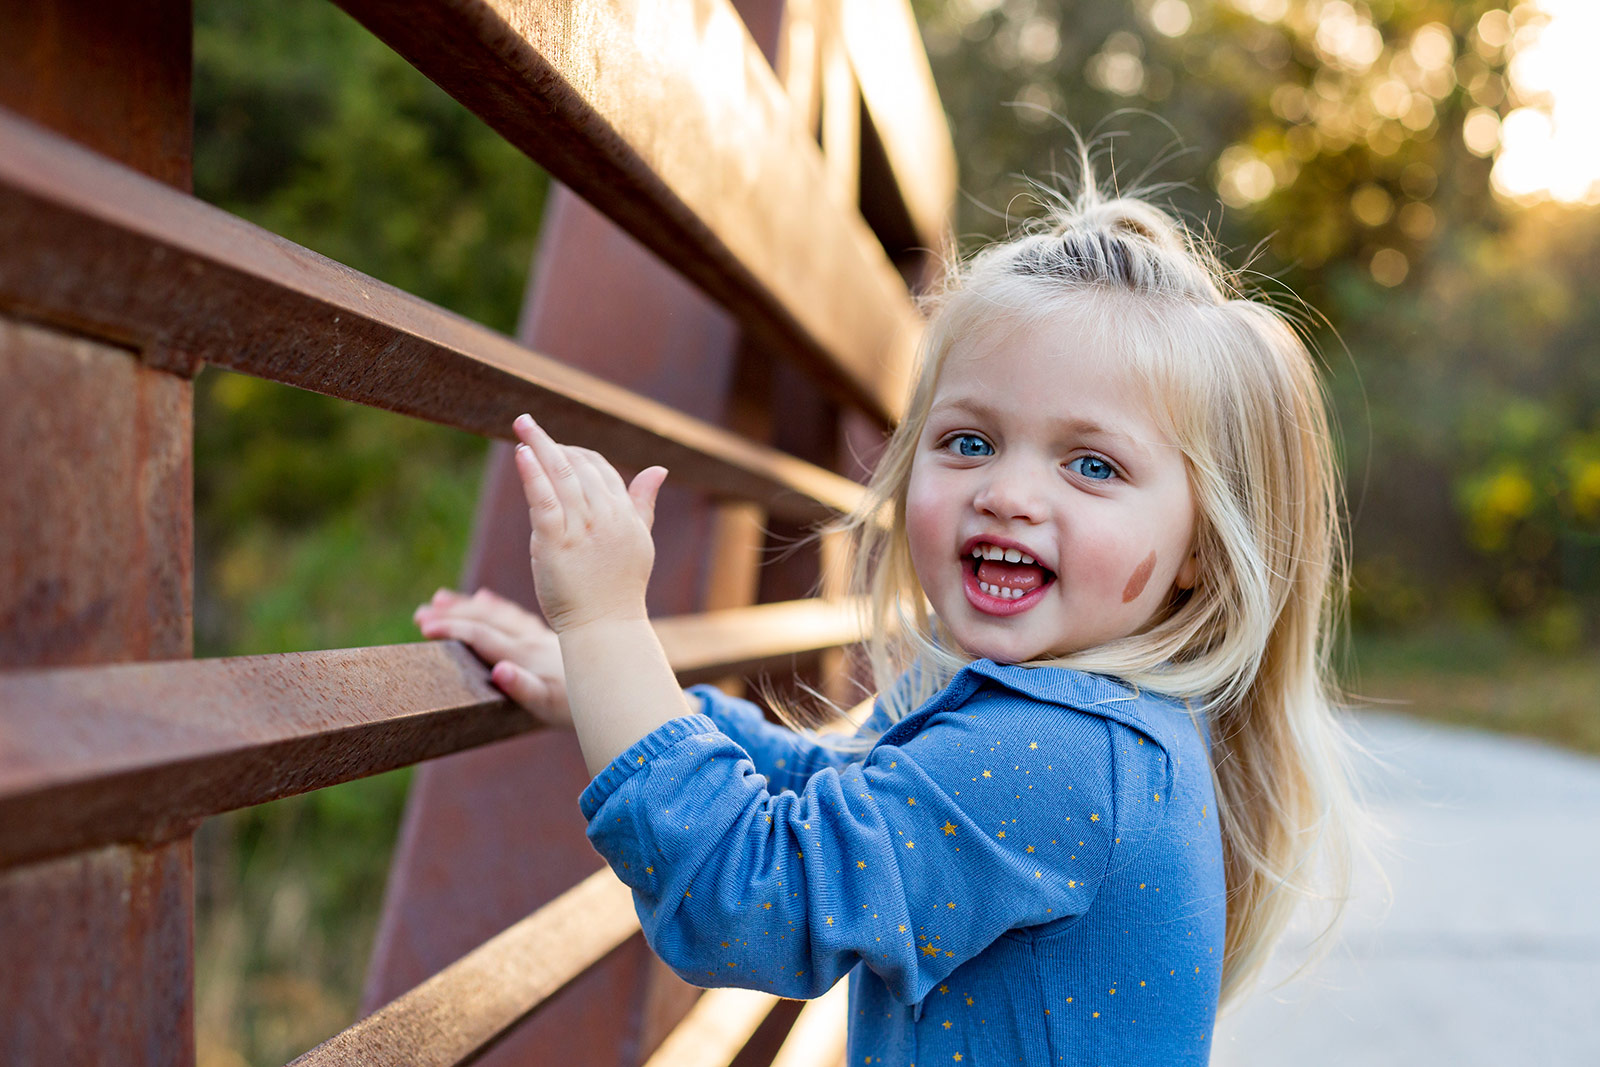 Isla plays with the rungs of the bridge railings and looks happily at the camera.